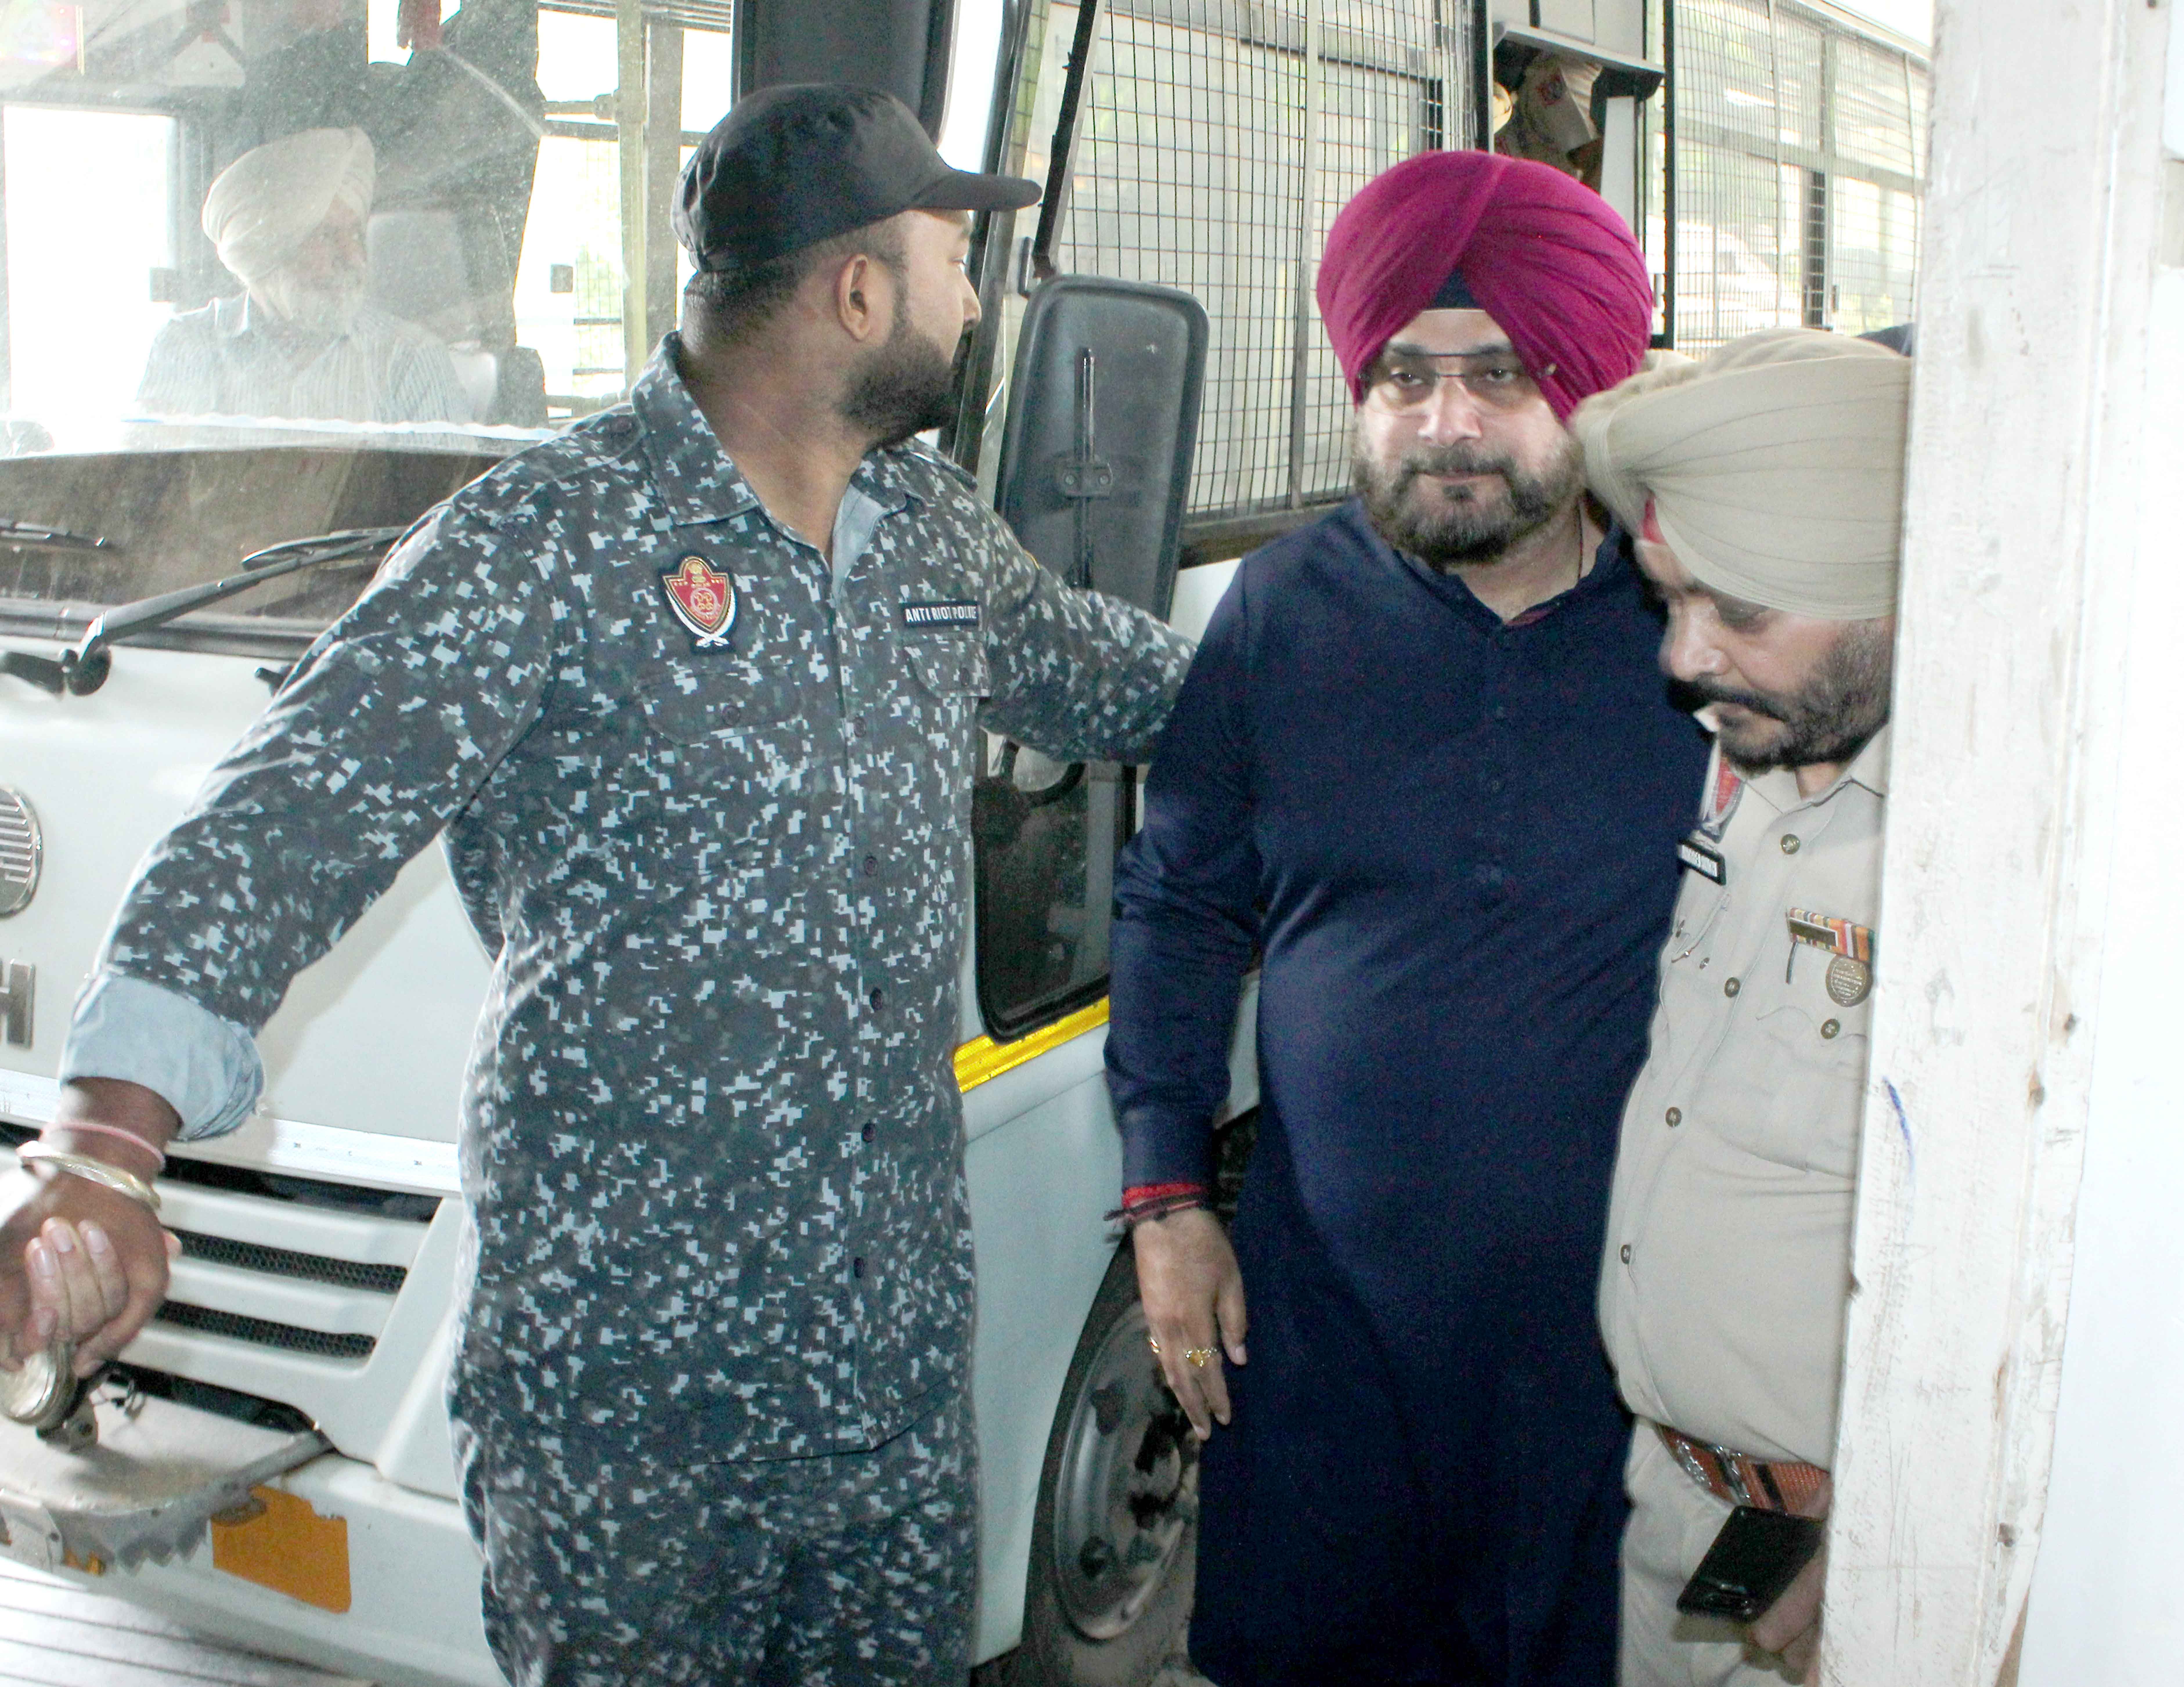 Low-fat, high-fibre diet suggested for Navjot Singh Sidhu